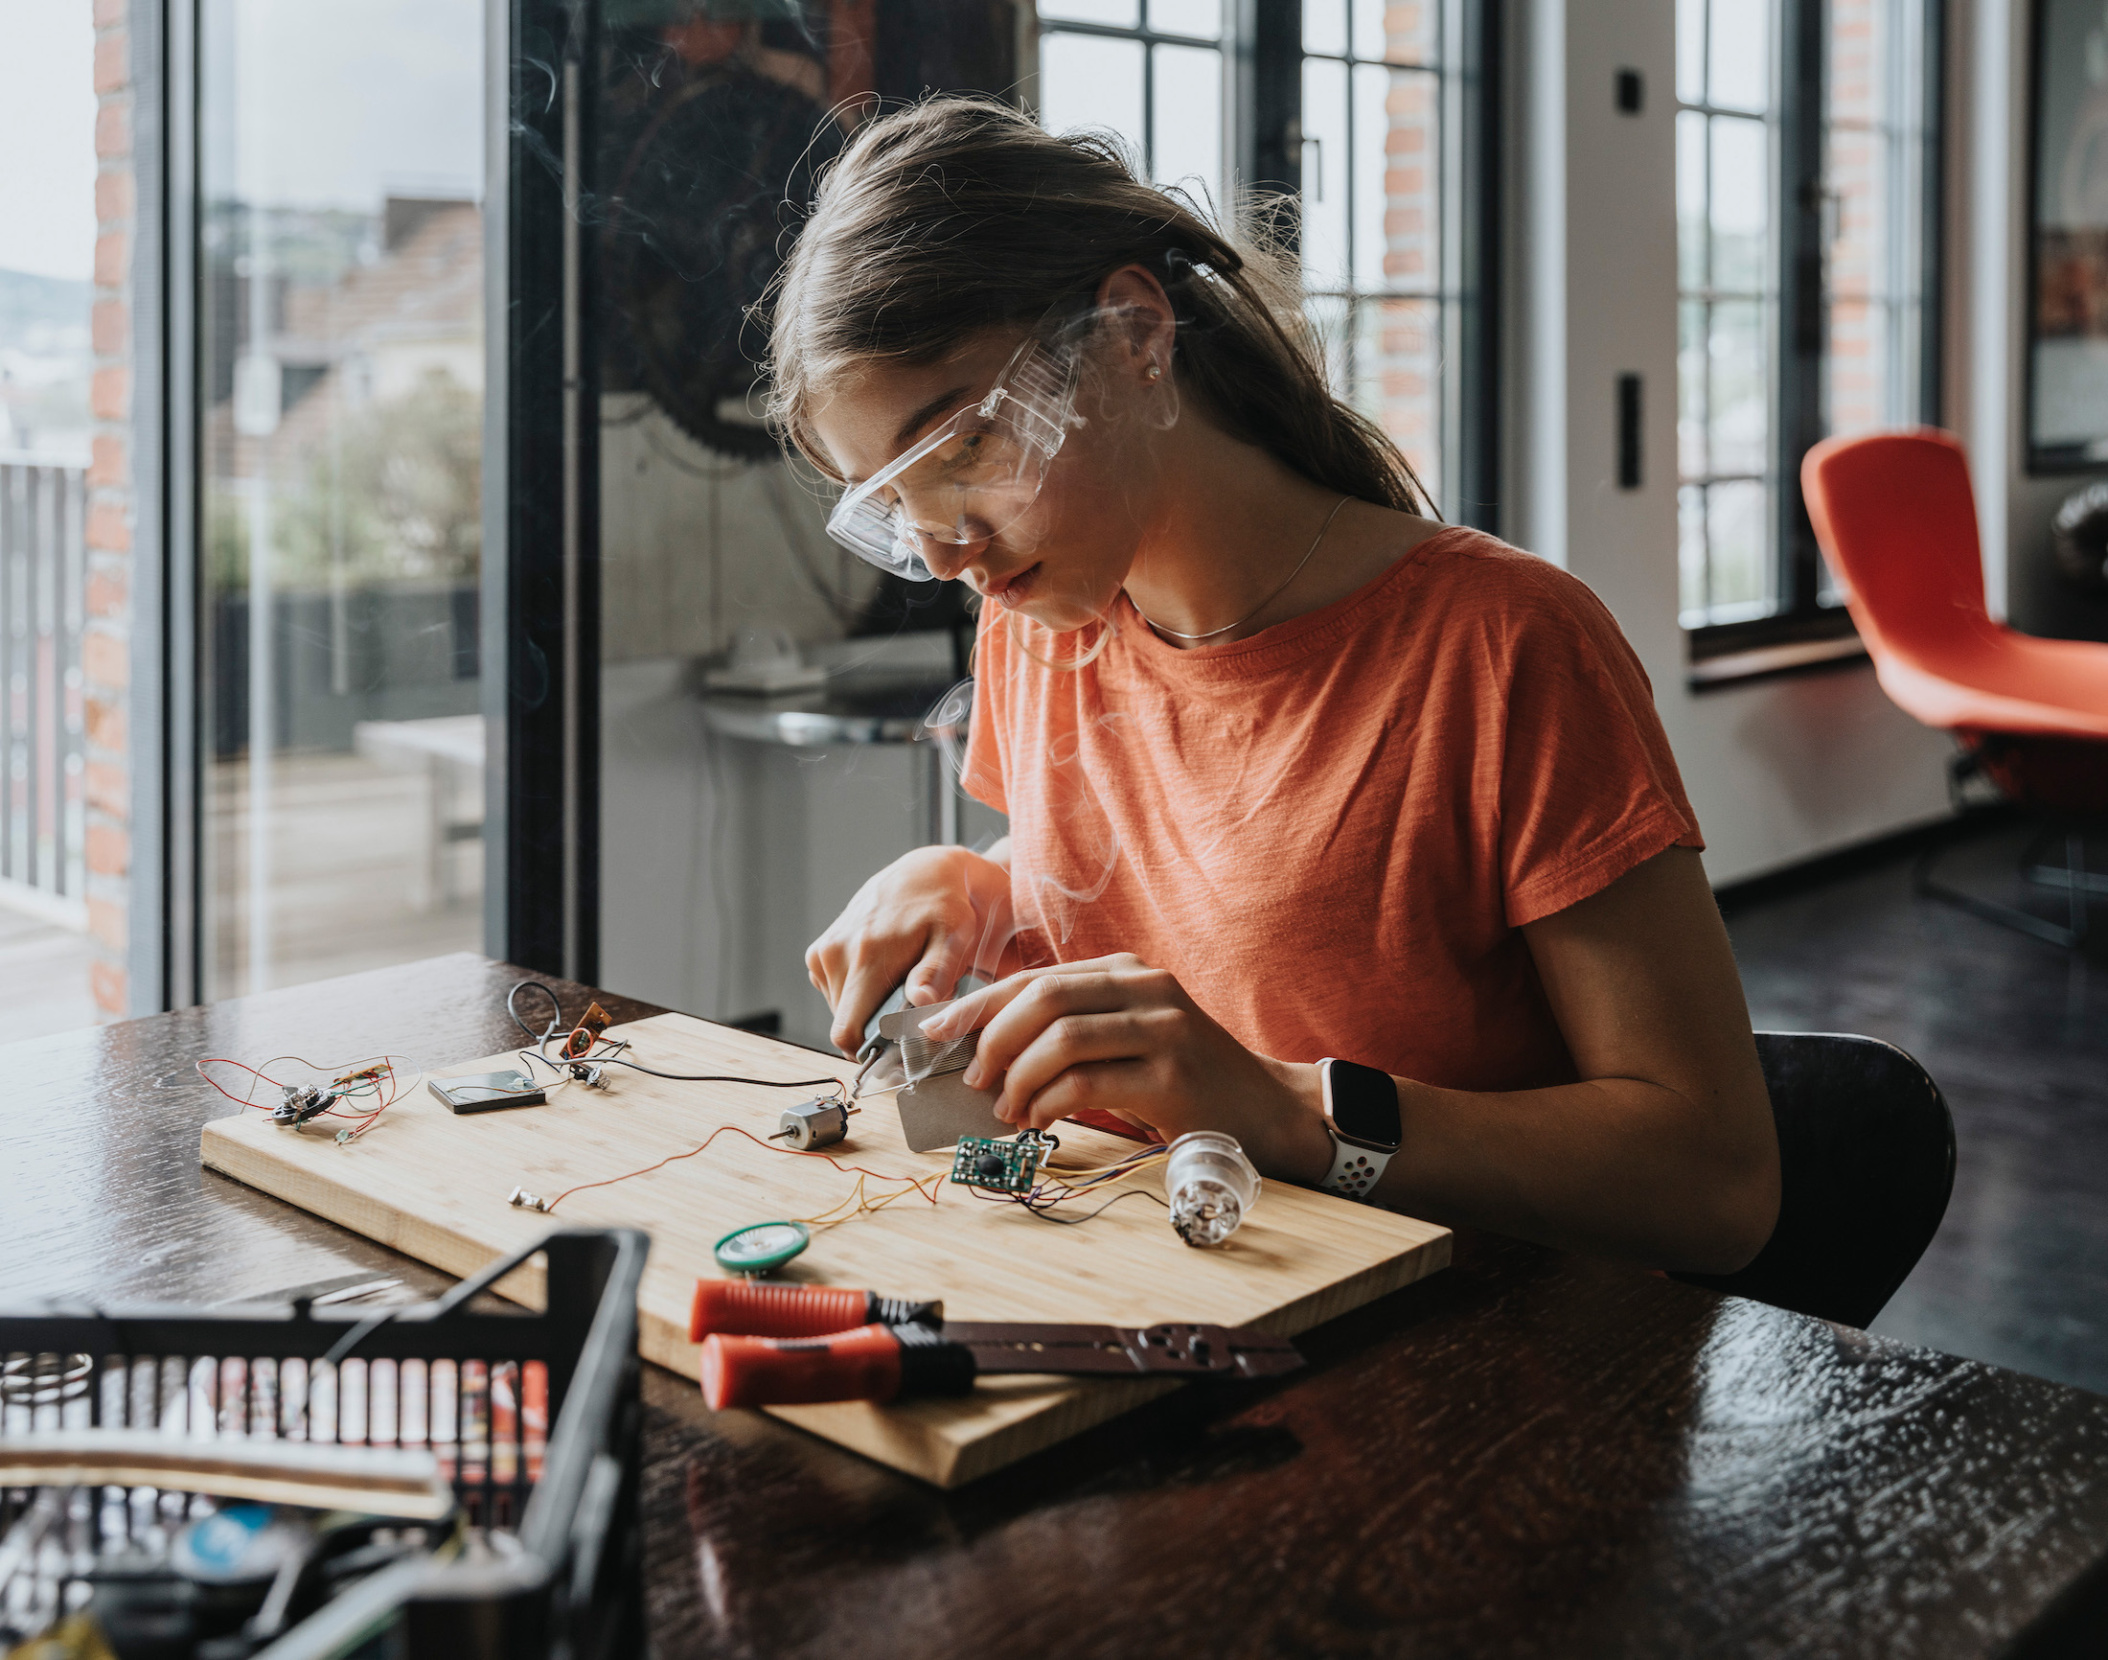 Teenager working with soldering iron at home, Wuppertal, NRW, Germany